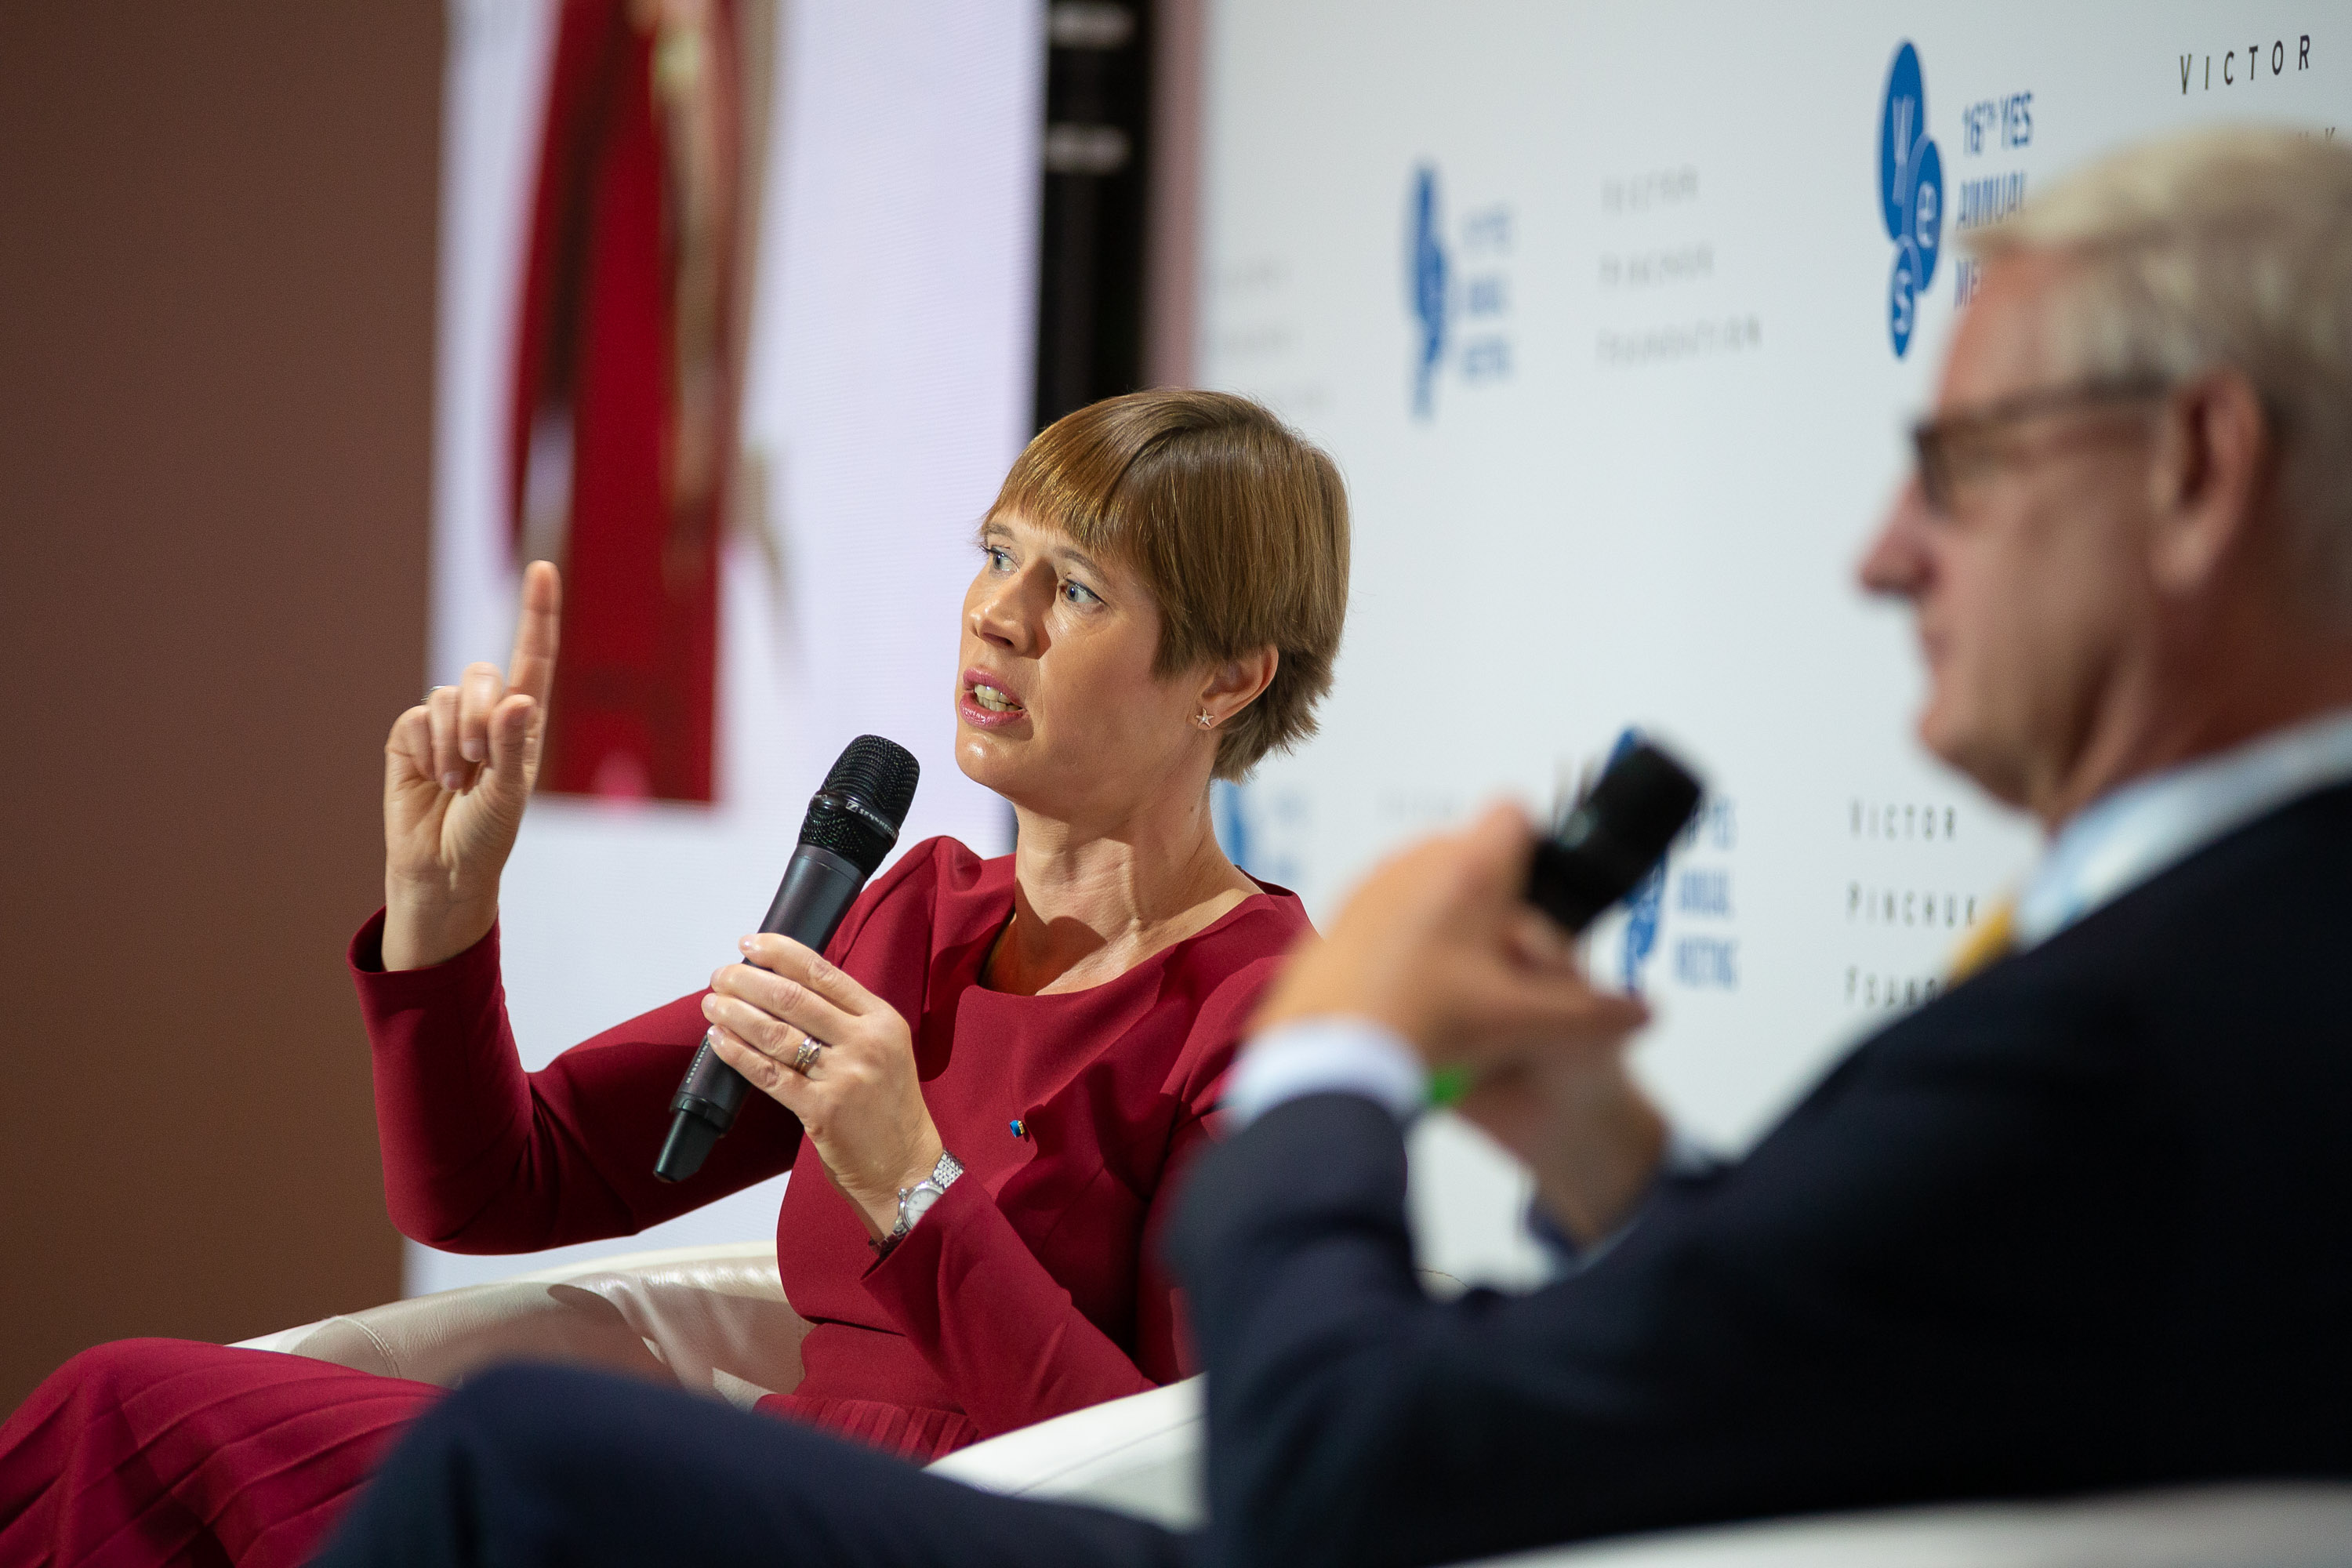 Public lecture “Conversation with H.E. Mrs Kersti Kaljulaid, the President of the Republic of Estonia”